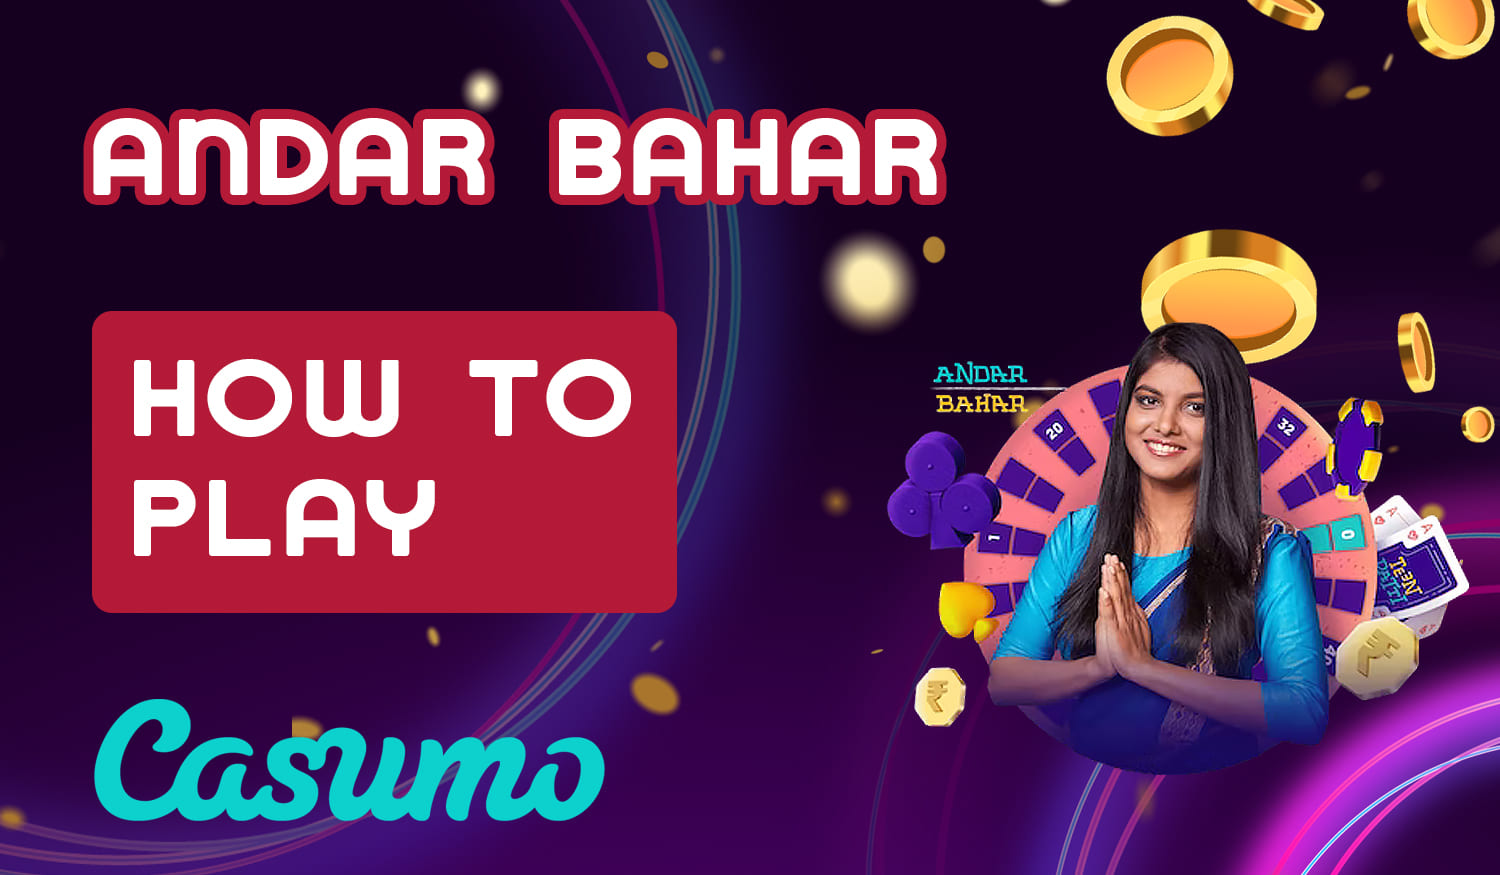 Step-by-step instructions and description of the game Andar Bahar on the Casumo website